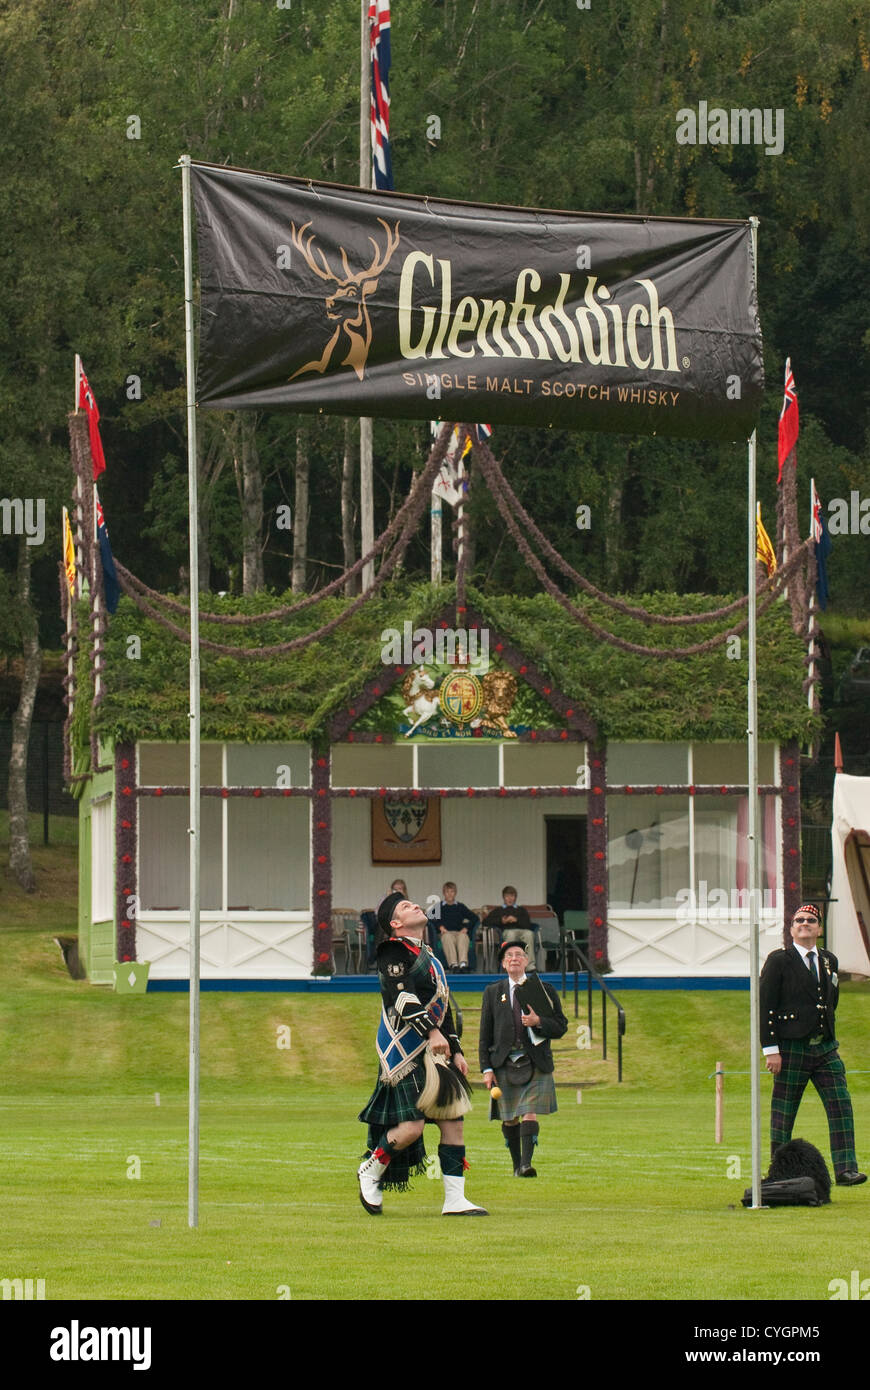 Man in traditional Scottish dress looking up at Glenfiddich whisky banner, Braemar gathering Stock Photo